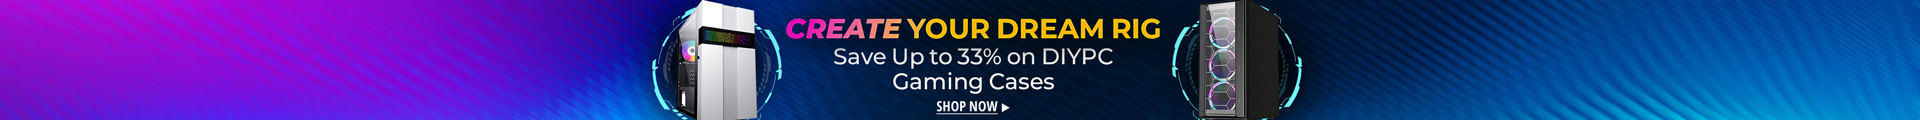 Save Up to 33% on DIYPC Gaming Cases